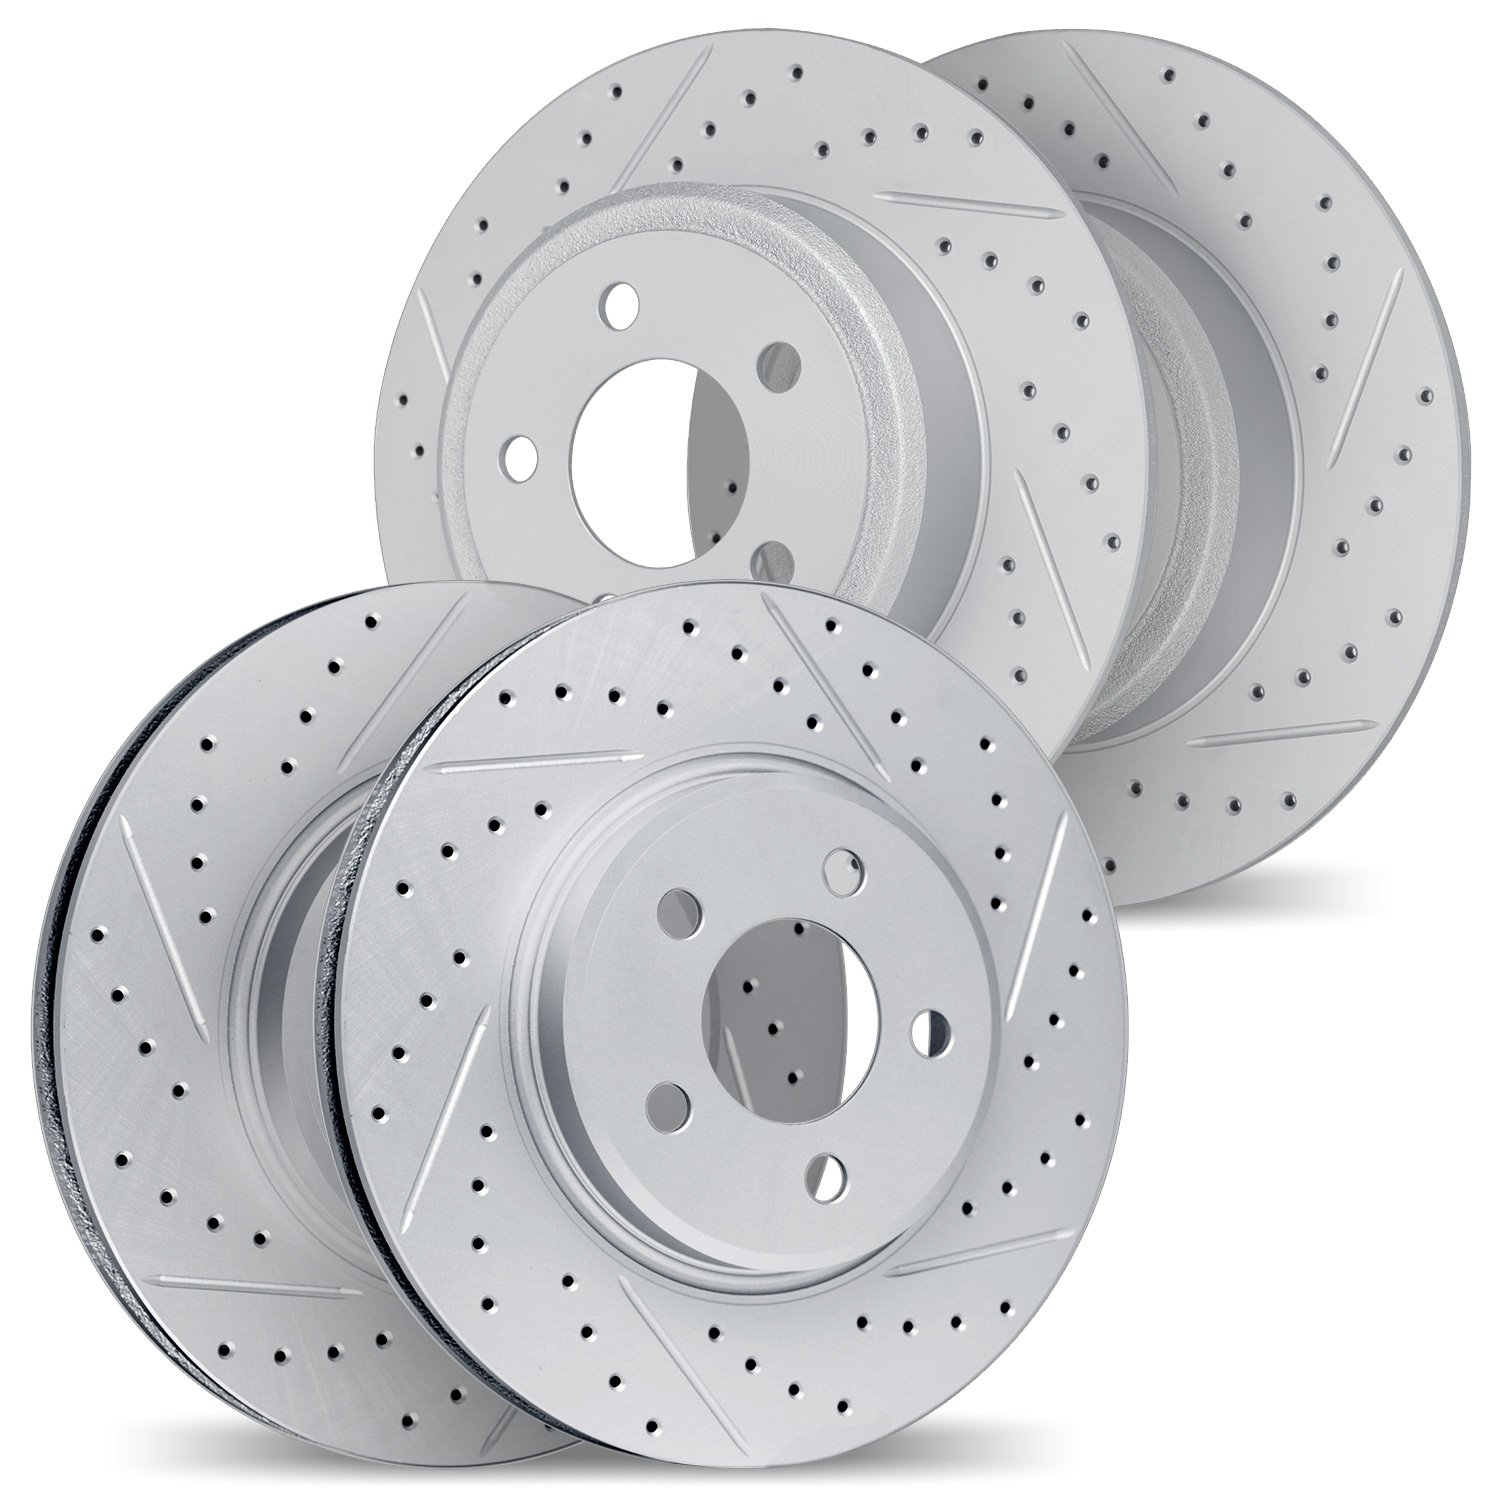 2004-80021 Geoperformance Drilled/Slotted Brake Rotors, 2013-2015 Ford/Lincoln/Mercury/Mazda, Position: Front and Rear